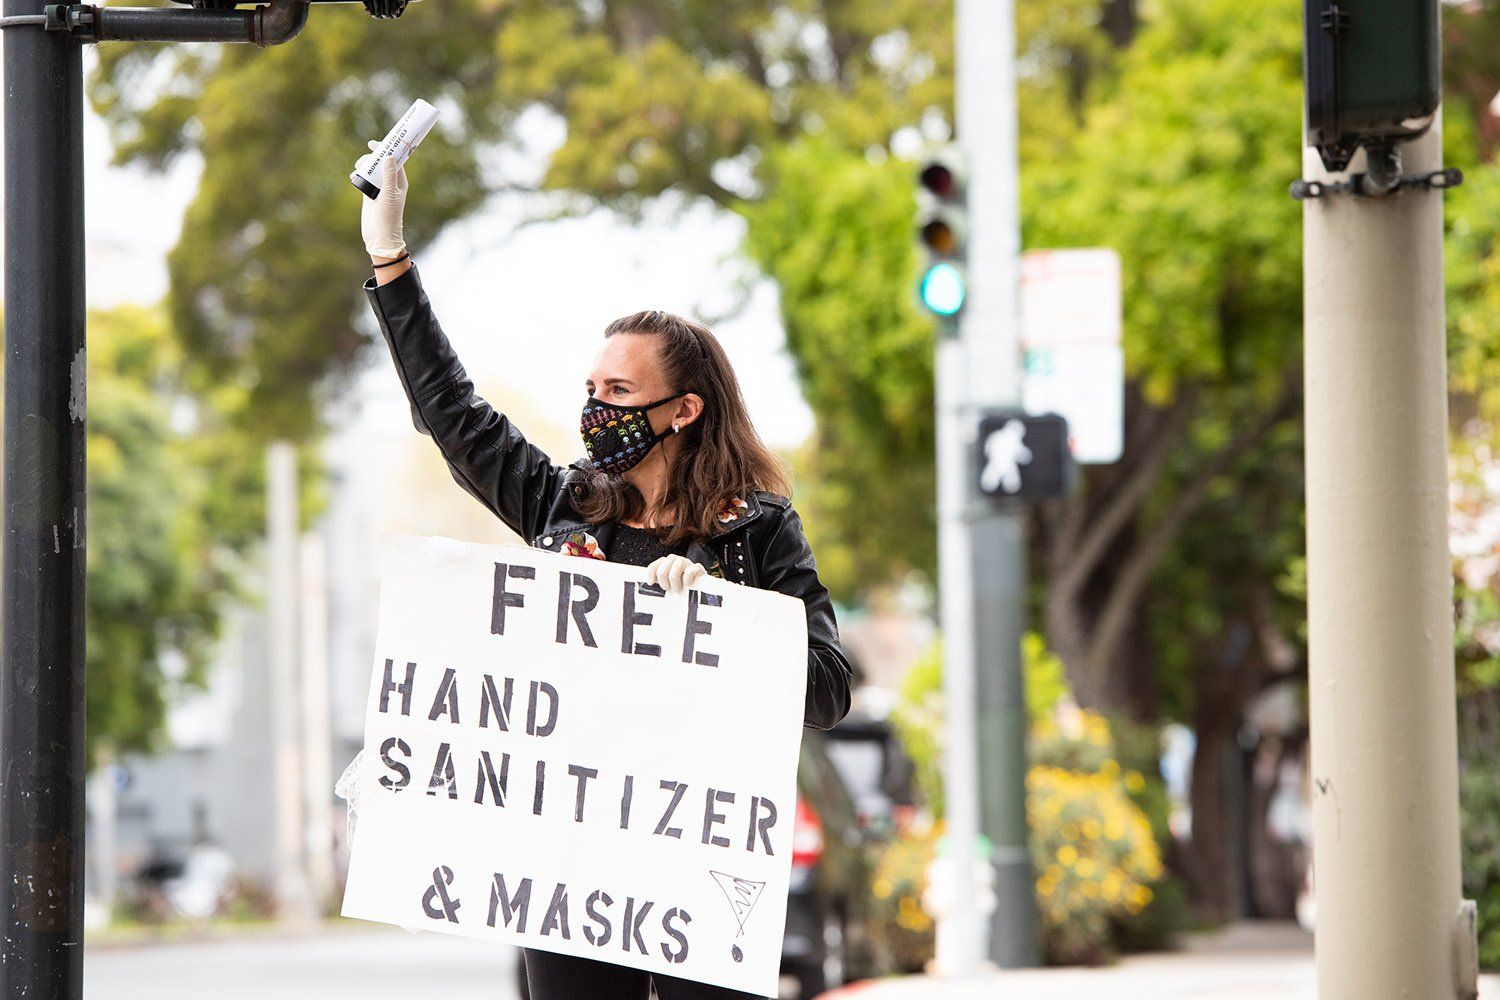 A UCSF postdoc holds up a sign that says free hand sanitizer and masks while holding a bottle of hand sanitizer up in her other hand